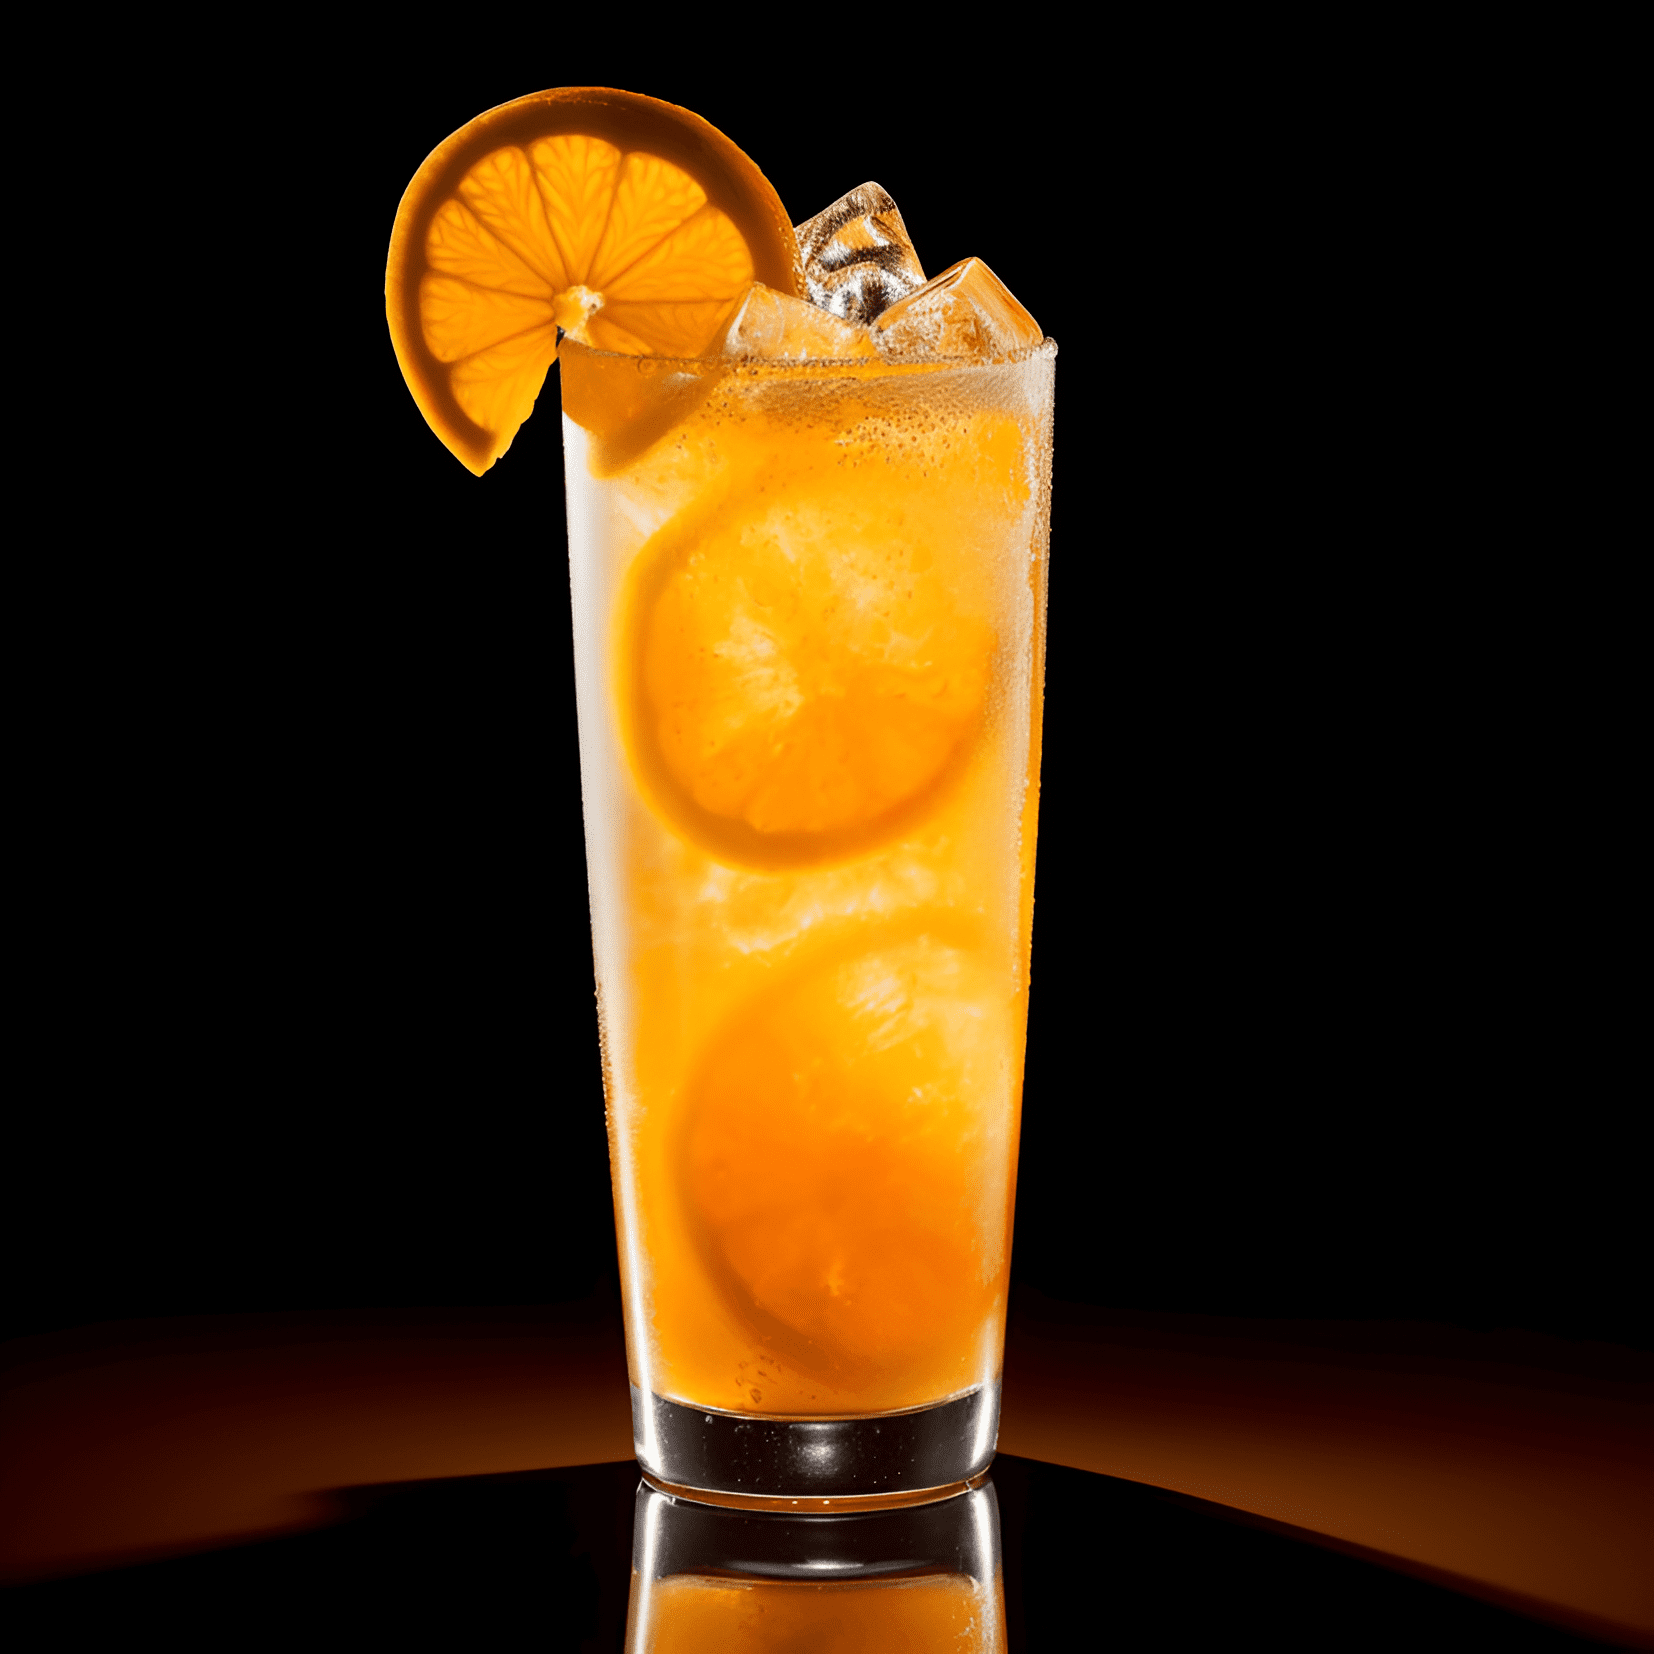 Orange Fizz Cocktail Recipe - The Orange Fizz has a delightful balance of sweet and sour flavors, with a tangy citrus taste from the orange juice and a slight bitterness from the orange liqueur. The addition of soda water gives it a light and effervescent mouthfeel, making it a refreshing and easy-to-drink cocktail.